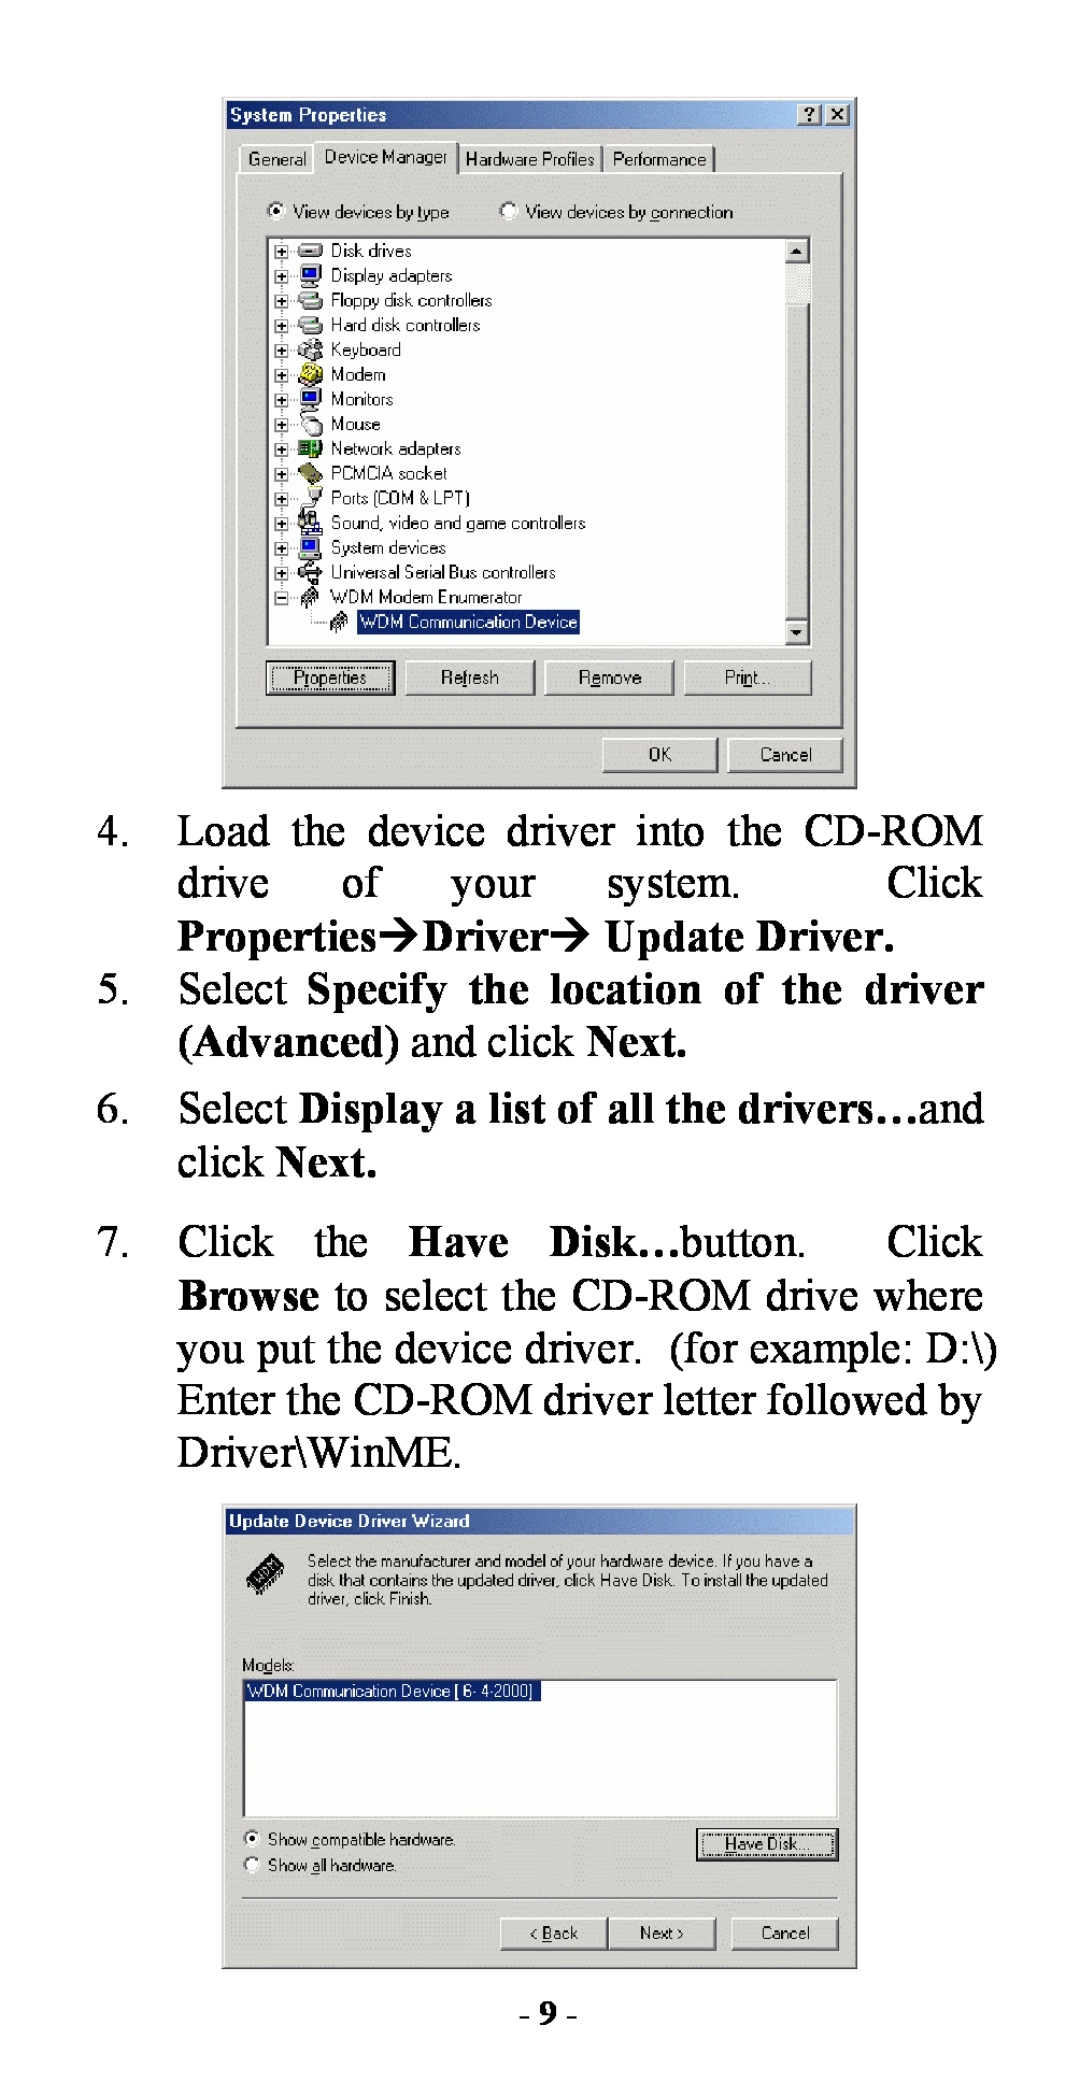 Abocom FM560C manual PropertiesÆDriverÆ Update Driver, Select Specify the location of the driver Advanced and click Next 